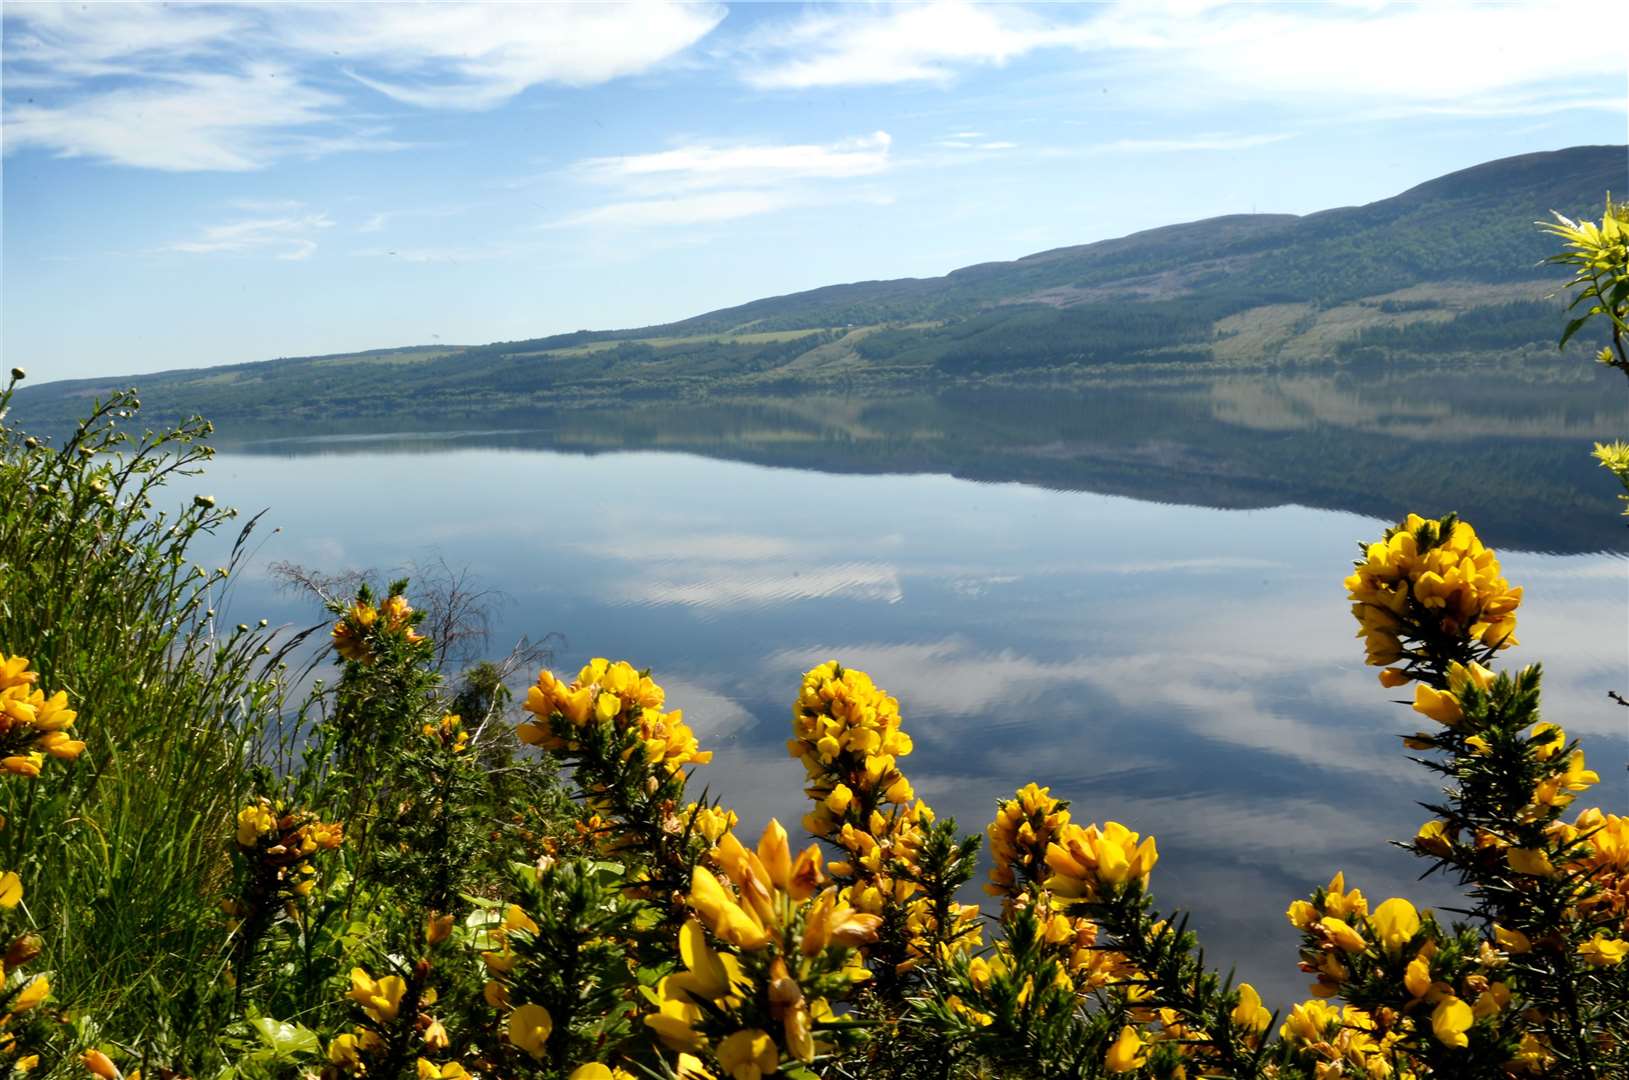 The West Loch Ness Farm Cluster aims to find solutions to the decline in biodiversity.